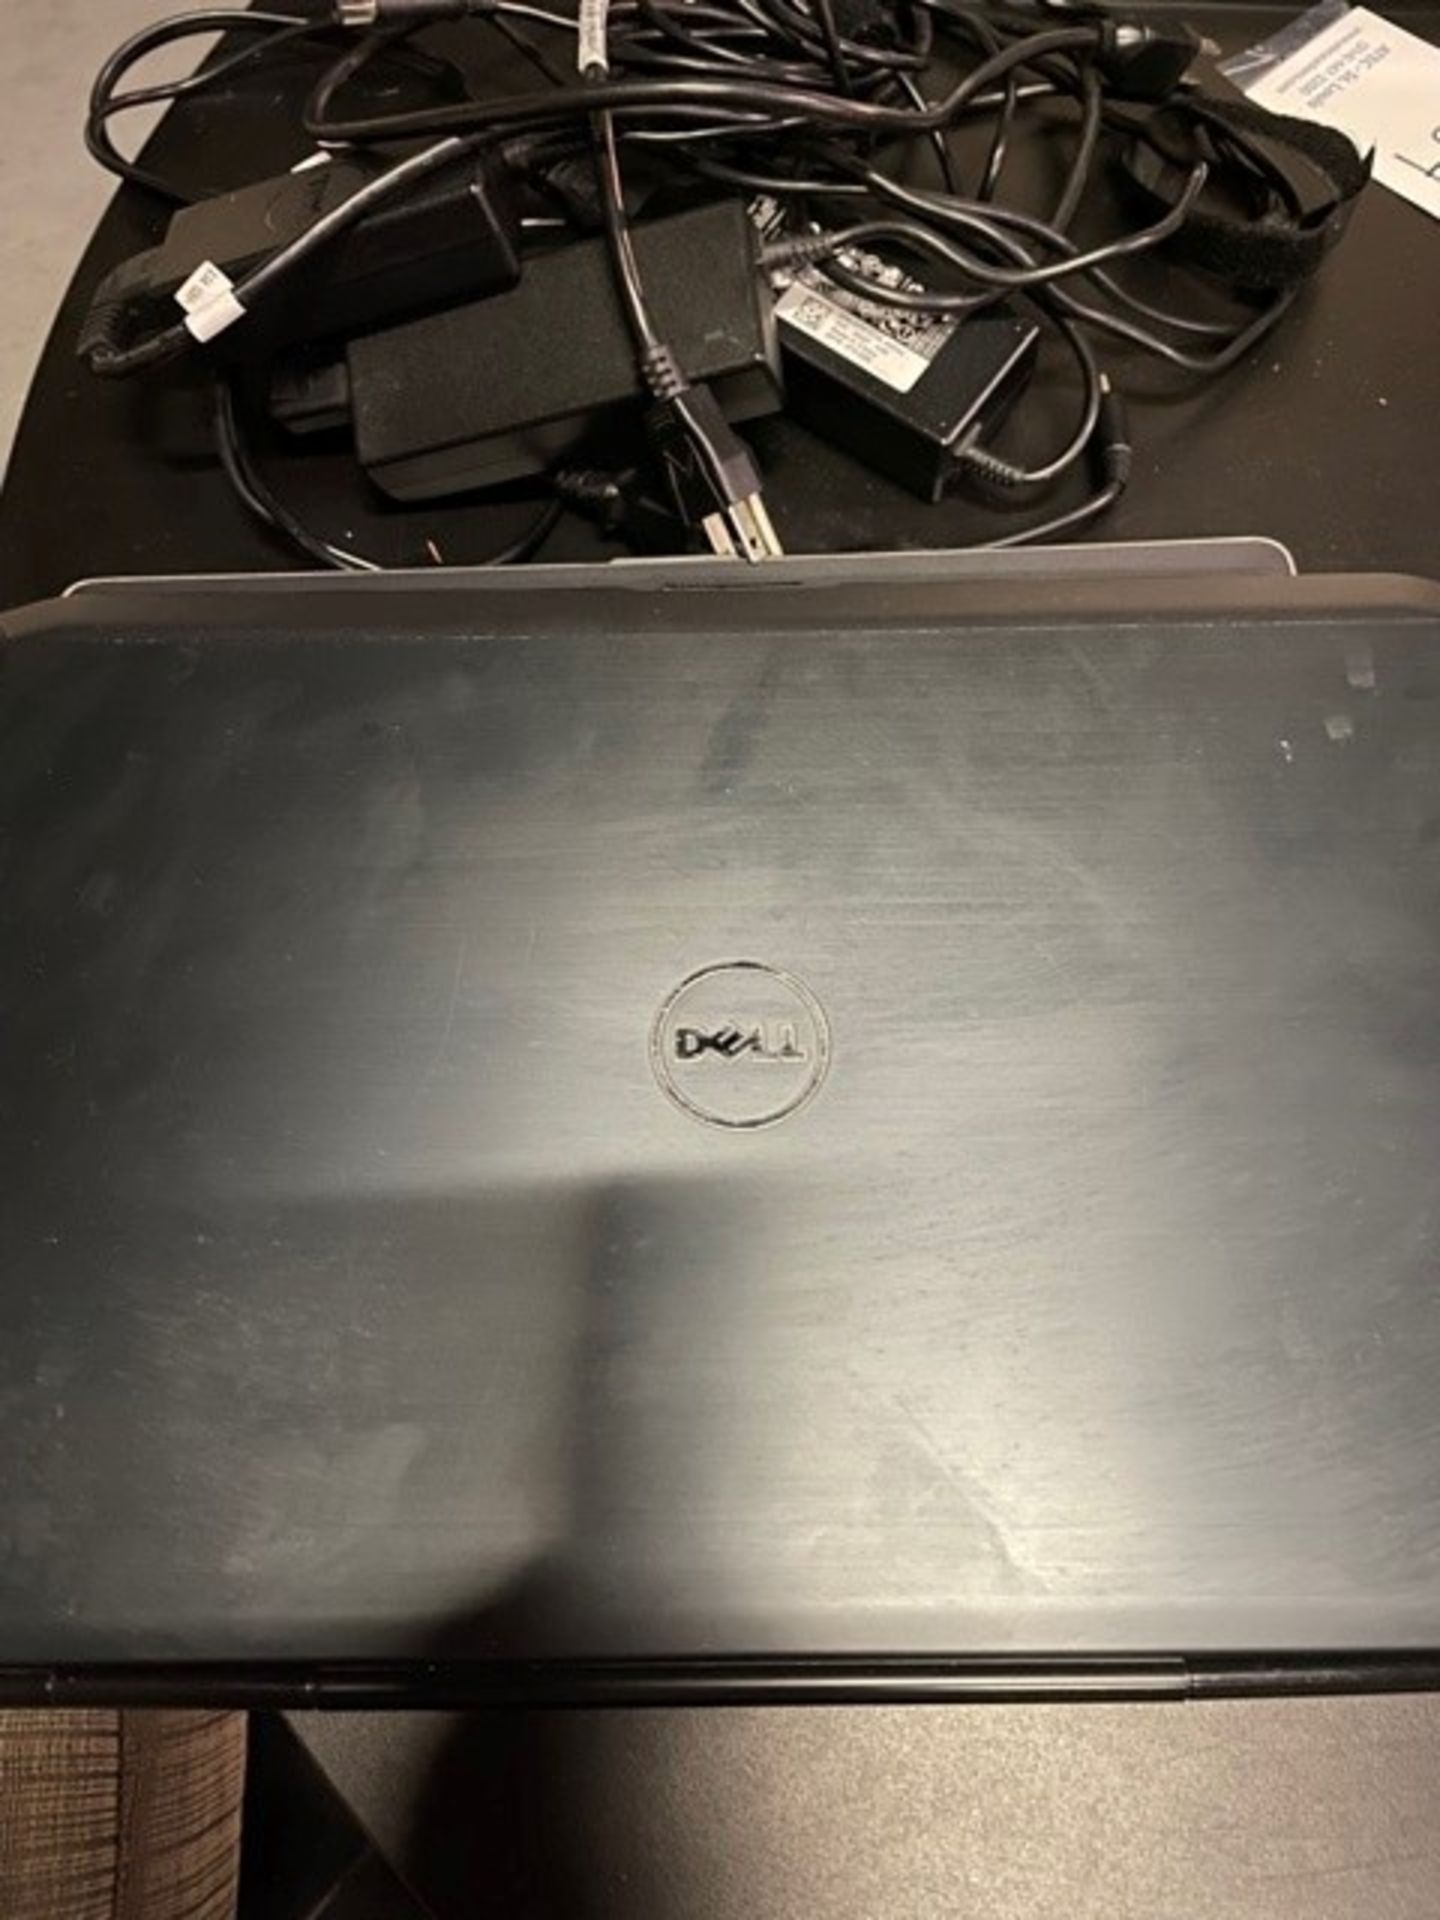 Lot Consisting of (2) Dell Laptops